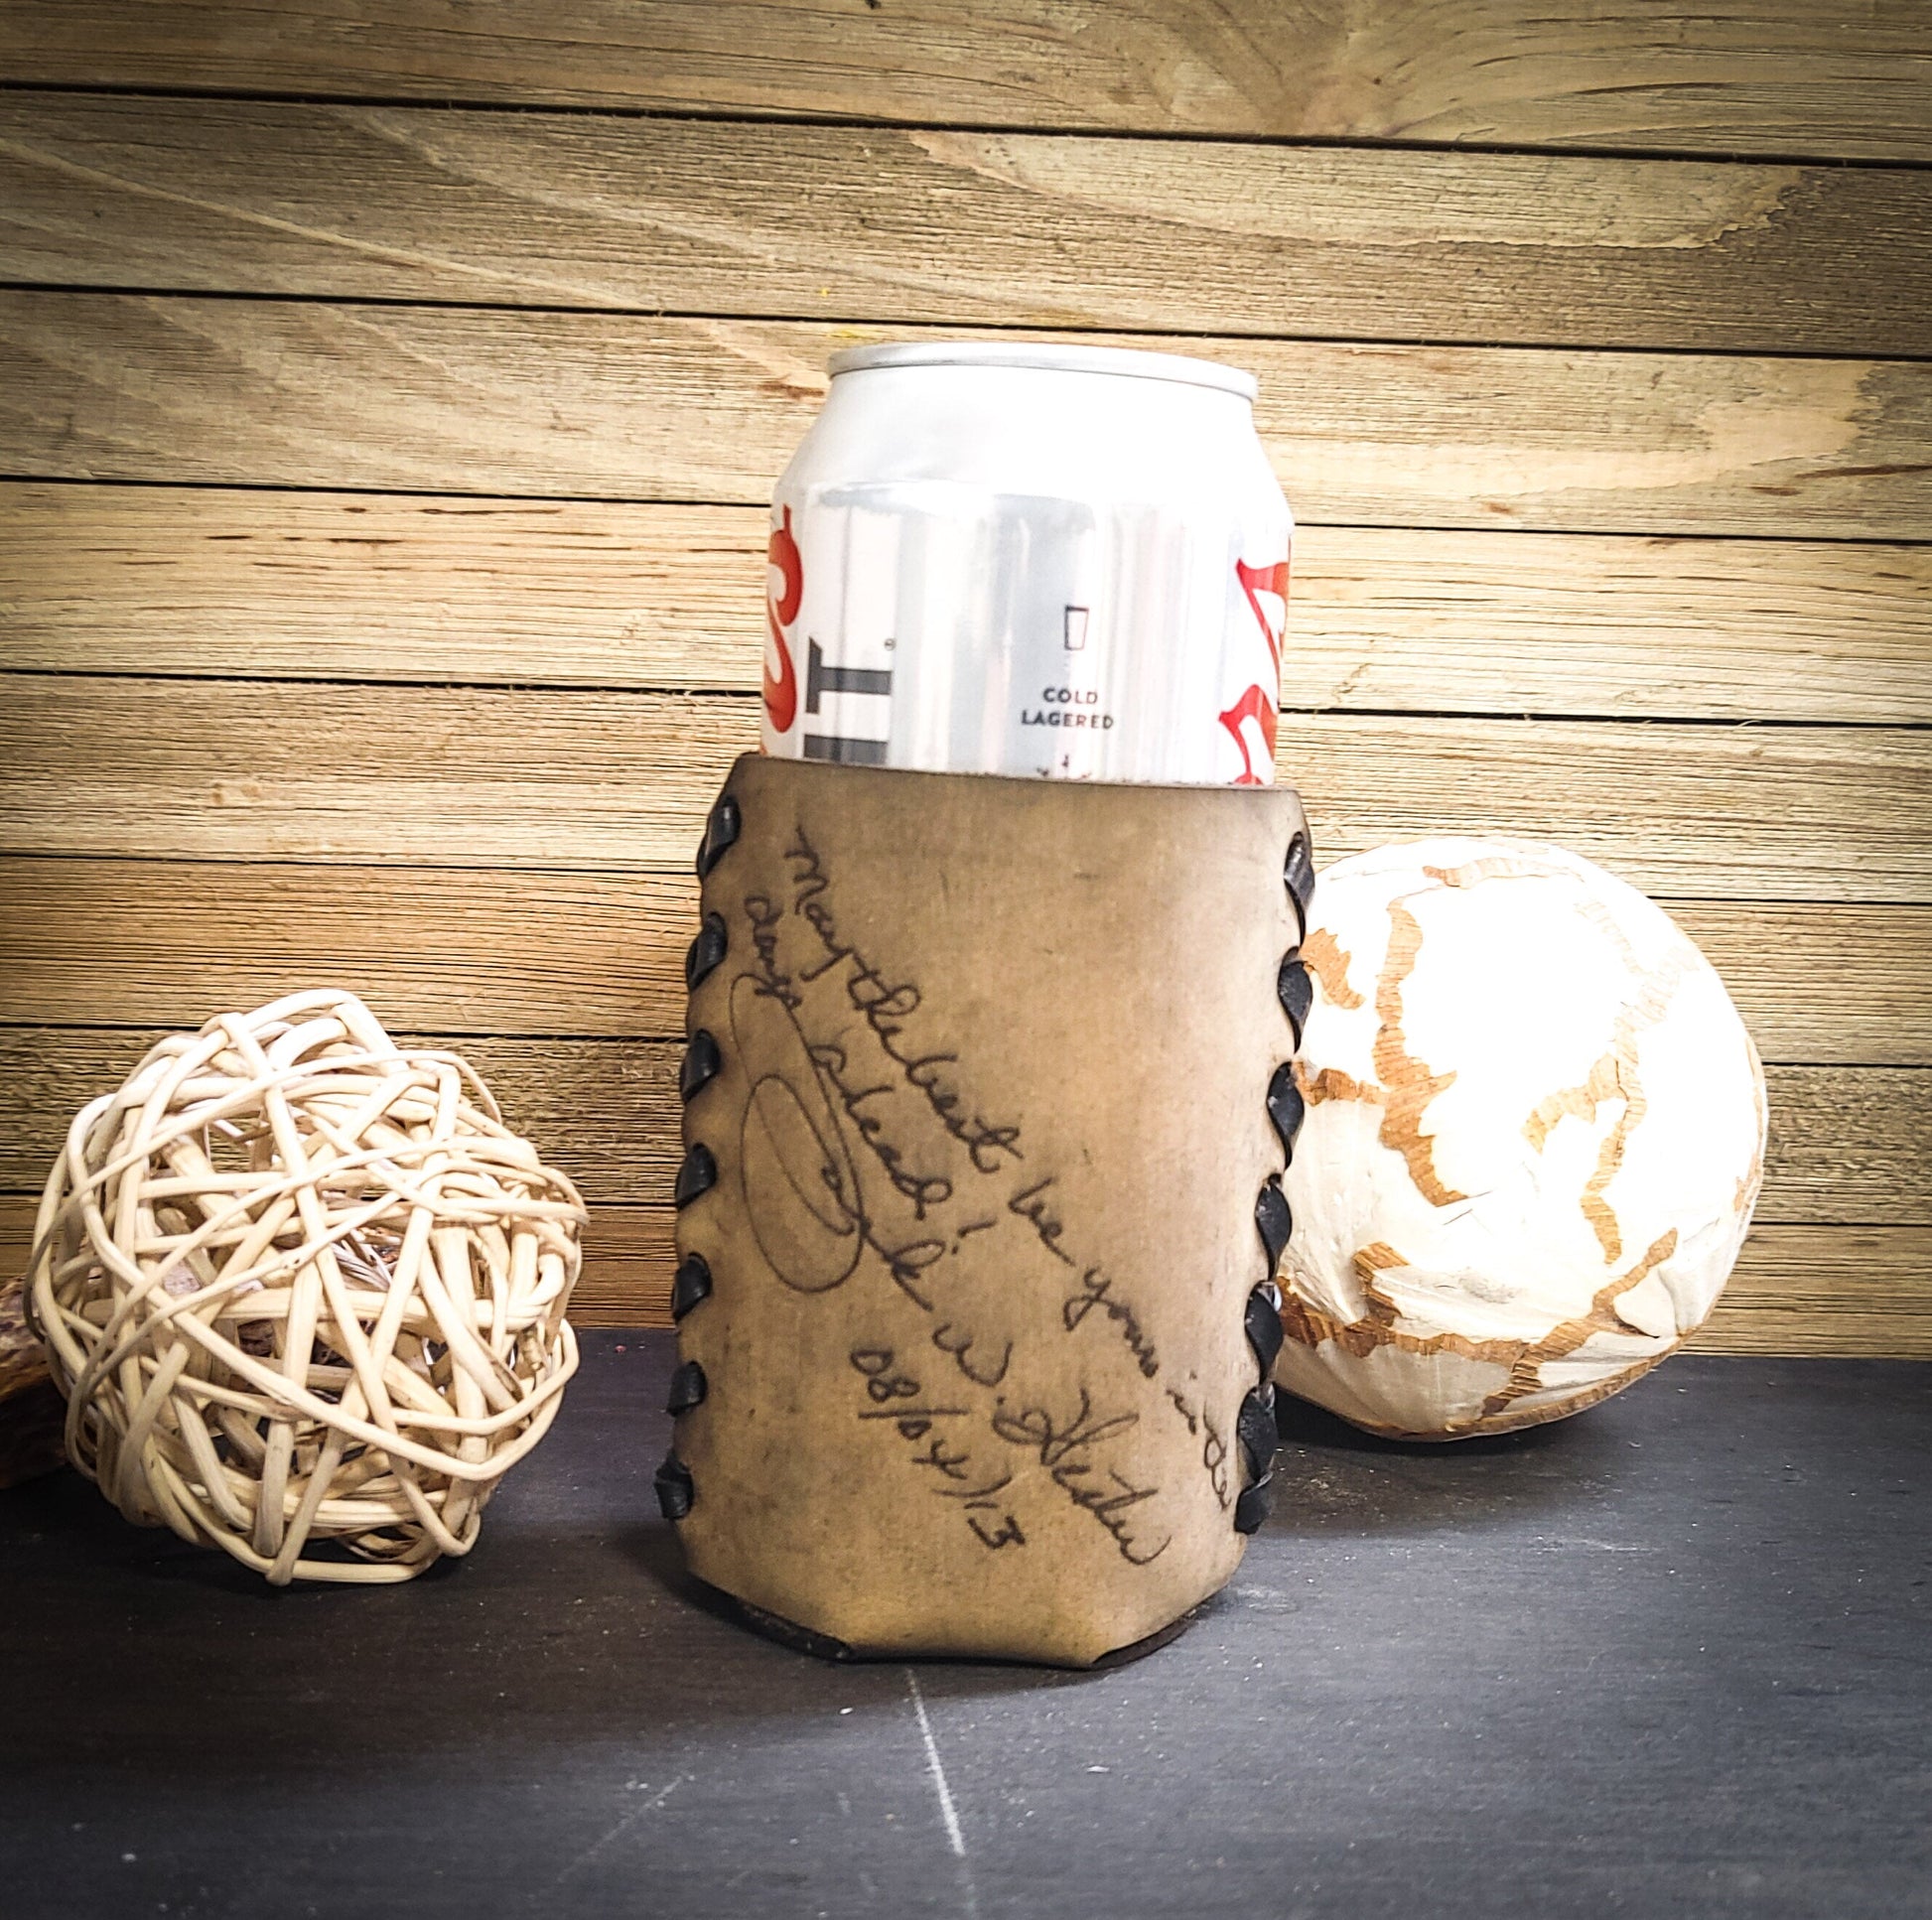 3-year wedding anniversary gift with handwritten message on brown leather koozie personalized three year wedding anniversary gift in leather